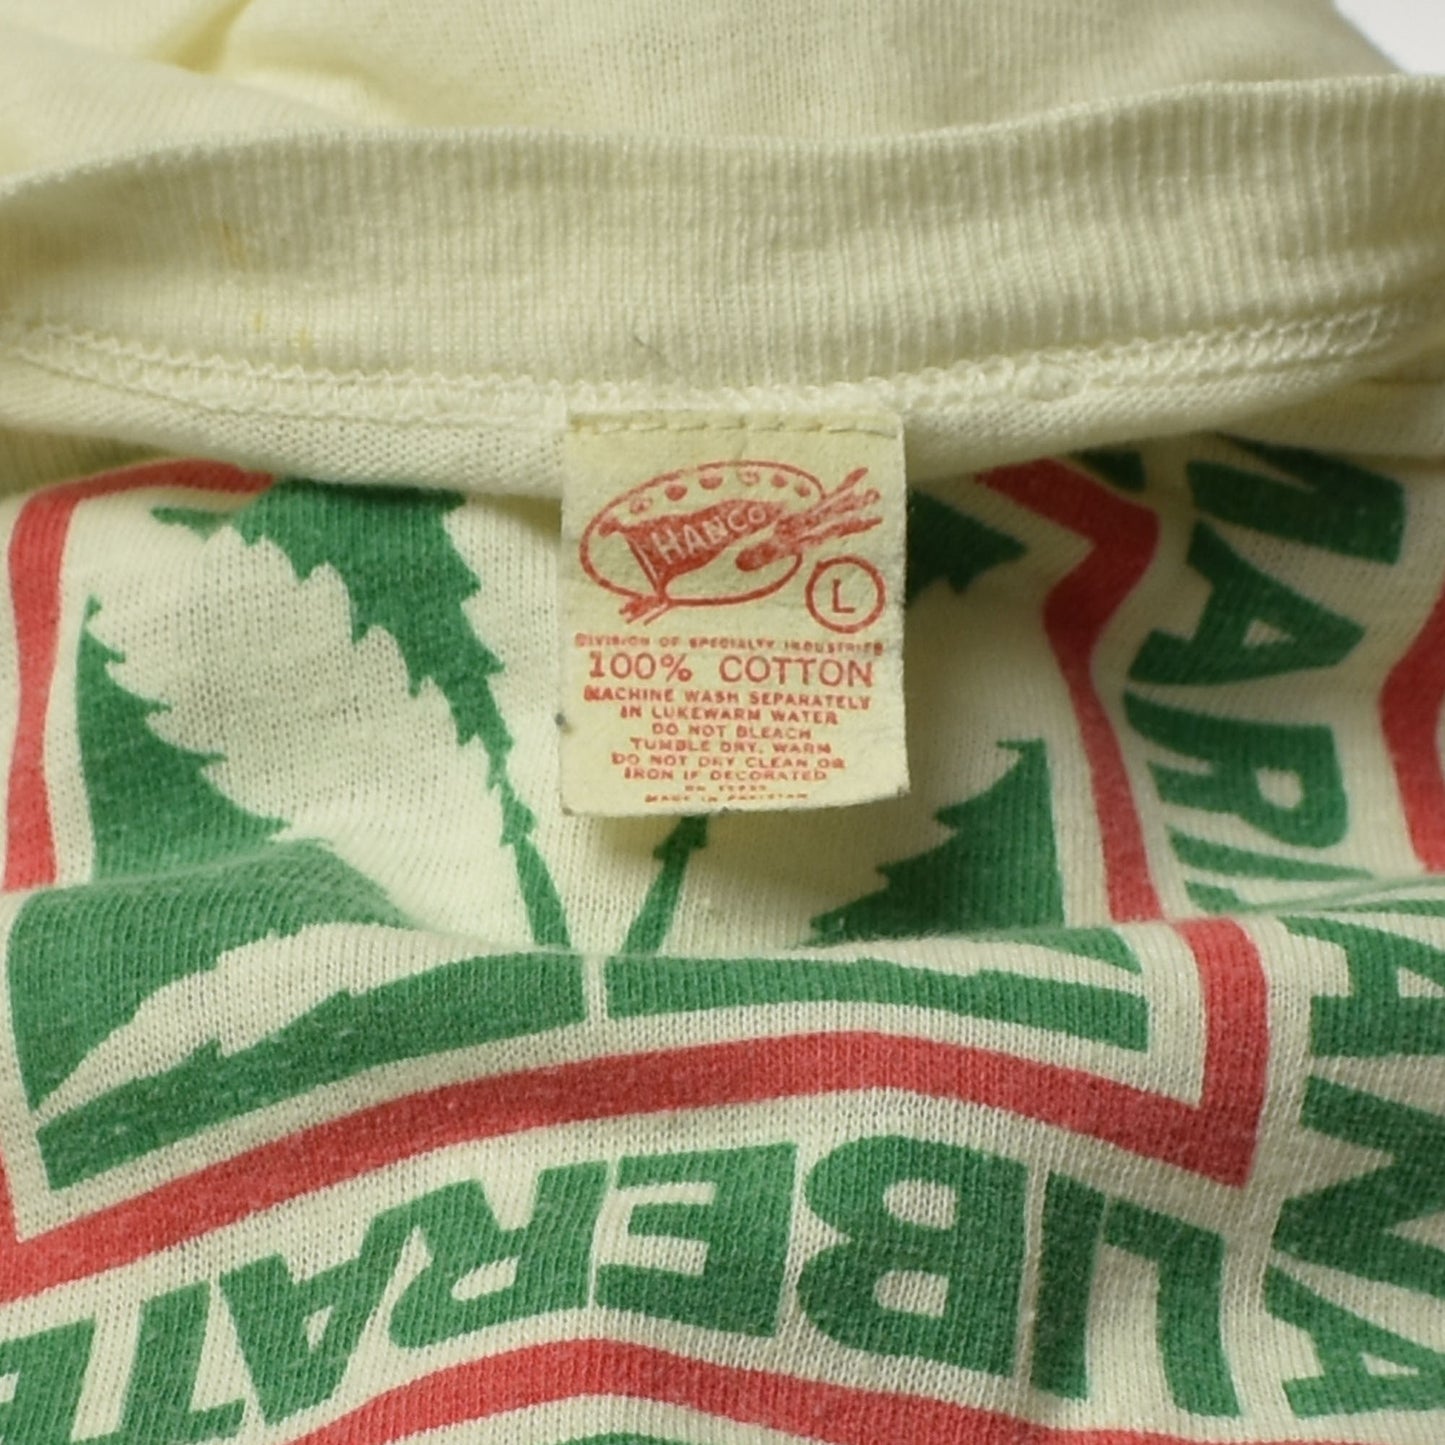 Vintage 70s Single Stitch "Liberate Marjiuana" Hanco Graphic Tee by NORML